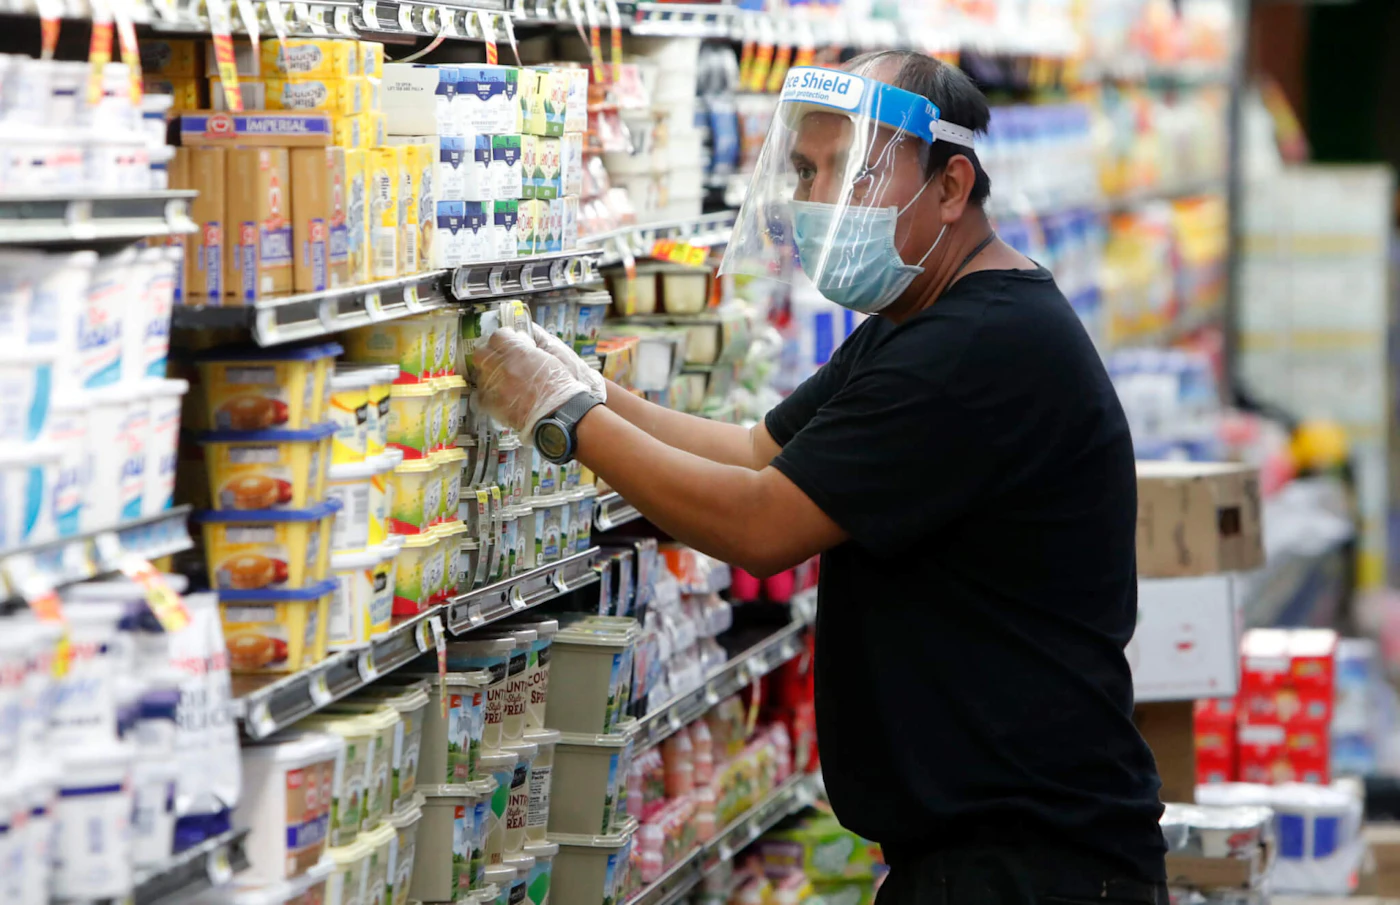 Amid concerns of the spread of COVID-19, a worker restocks products at a grocery store in Dallas, Wednesday, April 29, 2020.